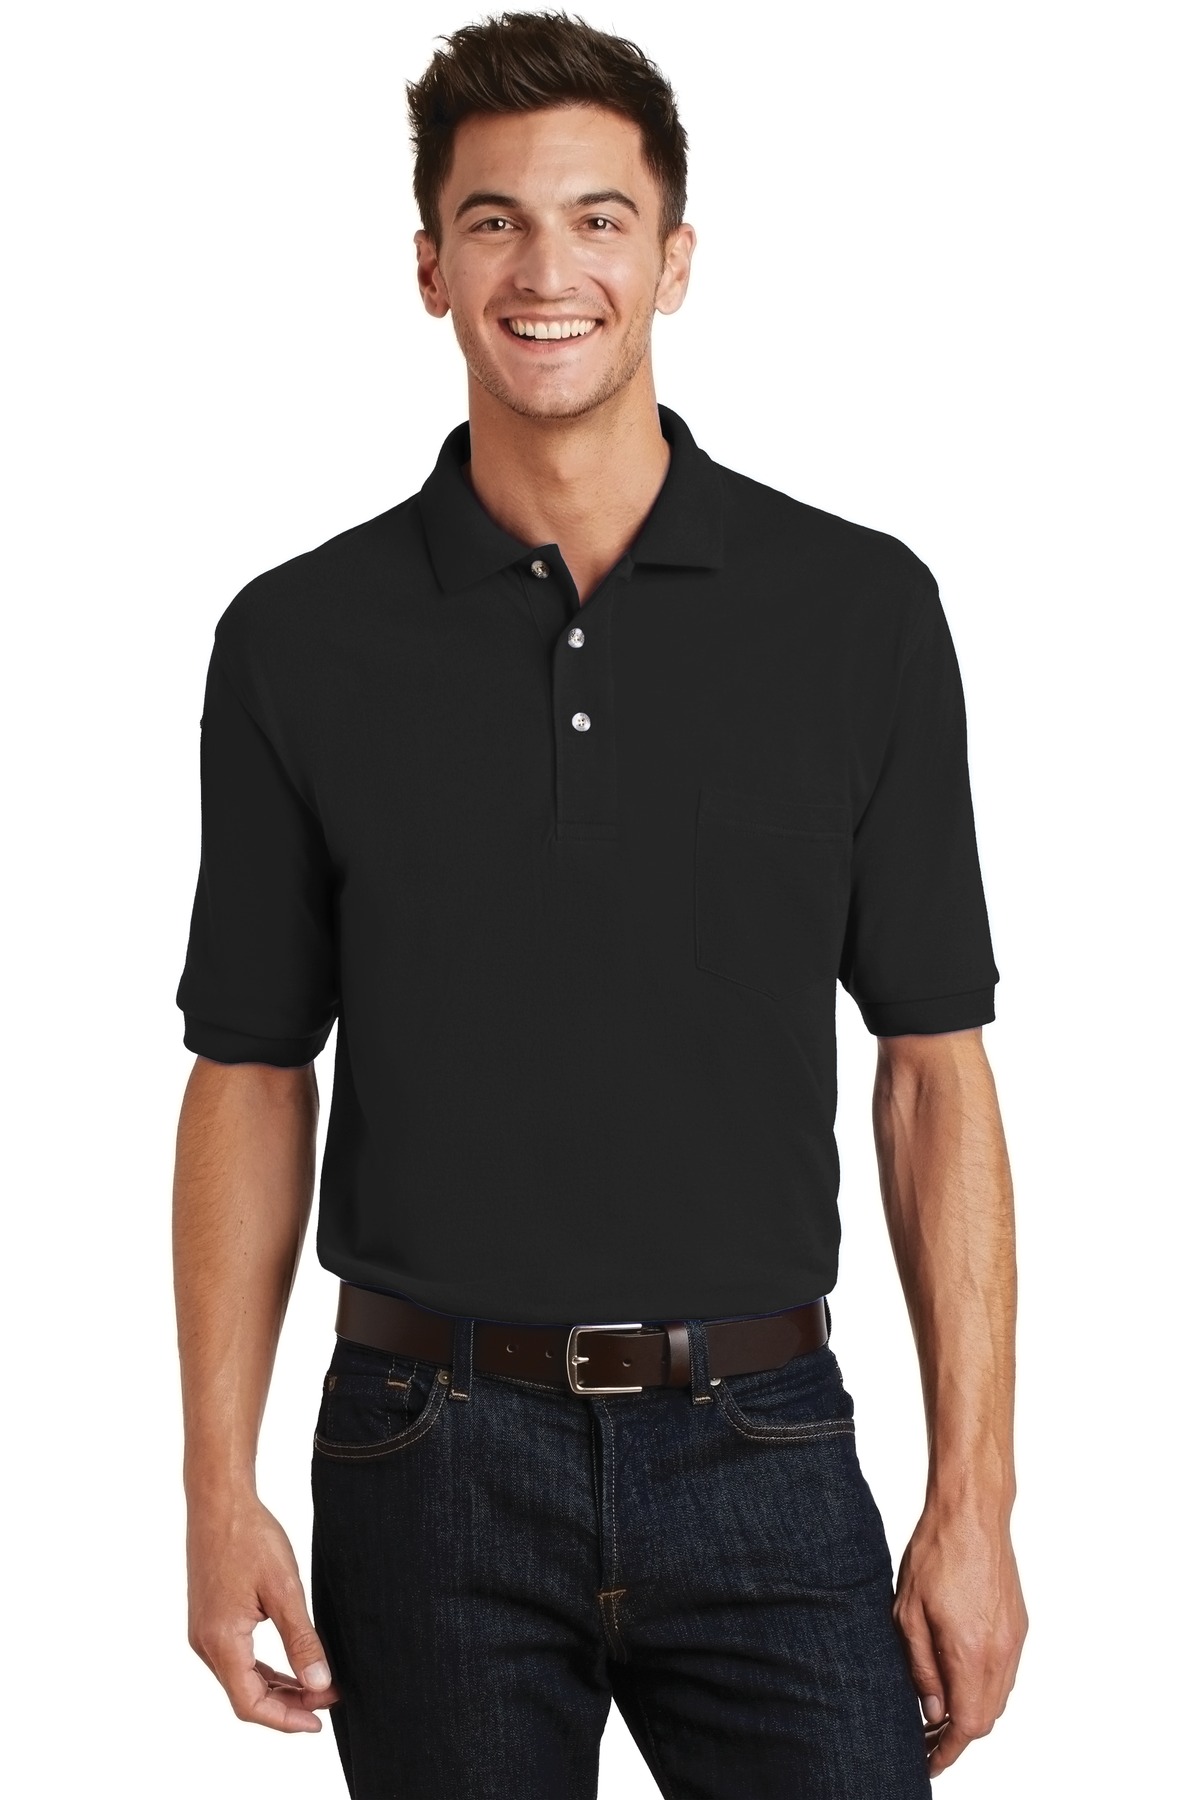 Port Authority Heavyweight Cotton Pique Polo with Pocket....